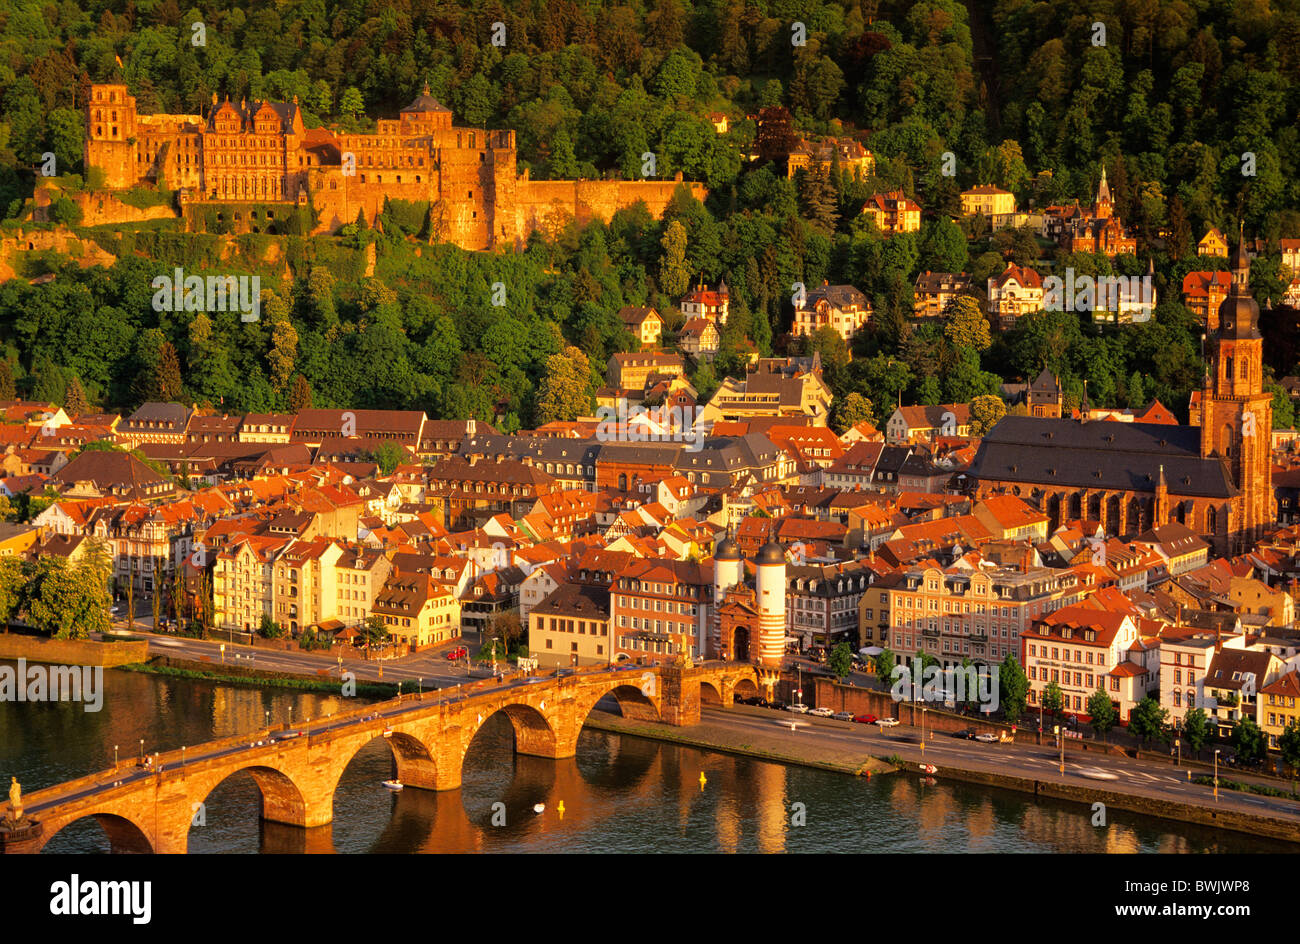 Europe, Germany, Baden-Wuerttemberg, Heidelberg, view of Heidelberg from Philosophenweg upon the old town with the castle, Heili Stock Photo